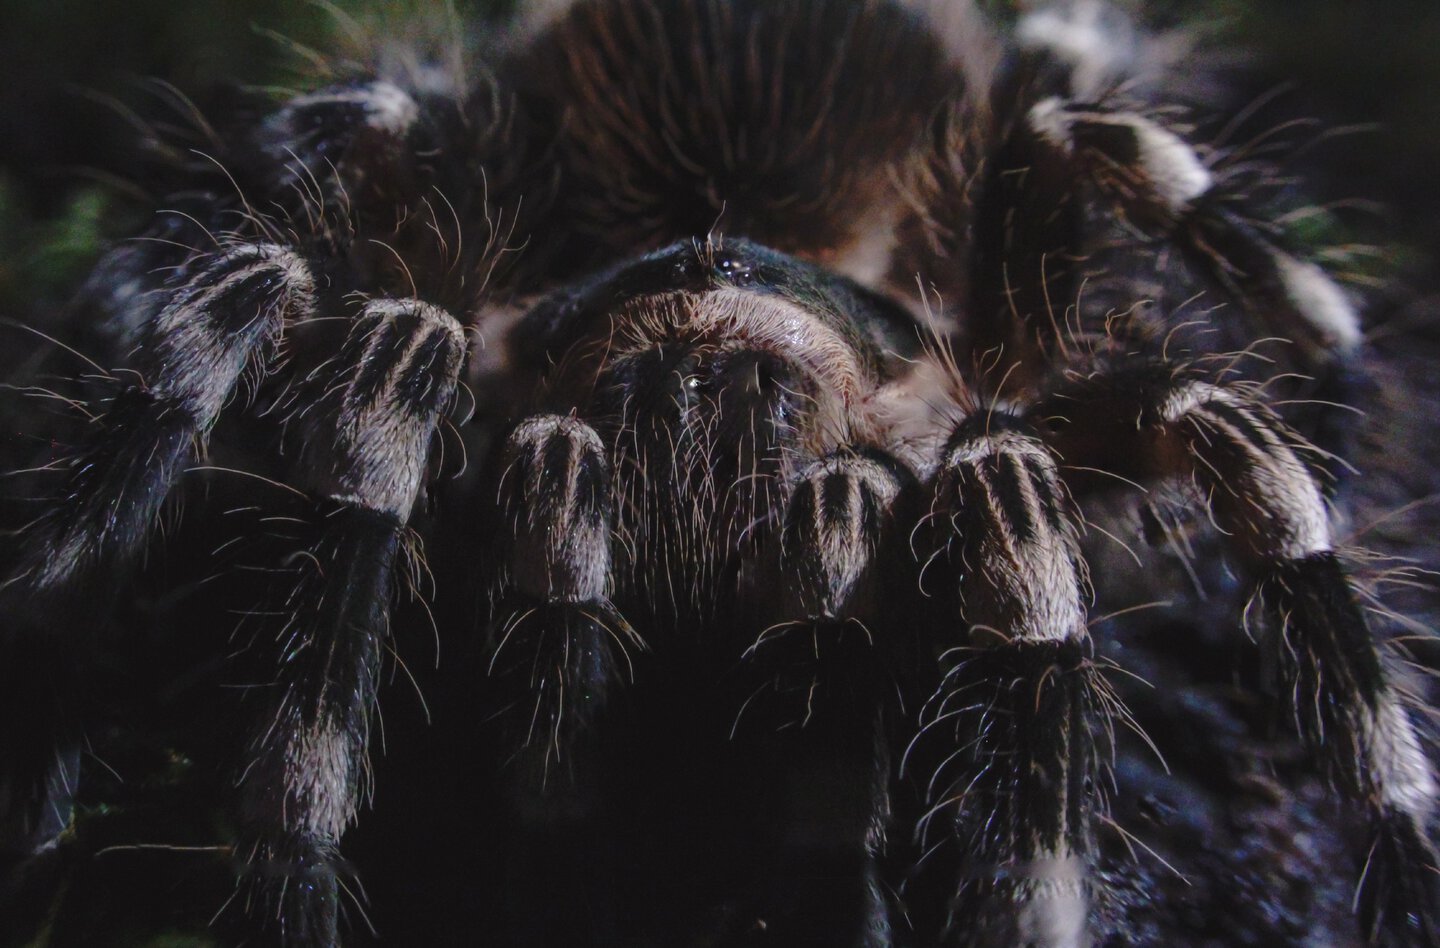 POV: You didn't pay tribute to the geniculata lords, but the geniculata has come for the tribute